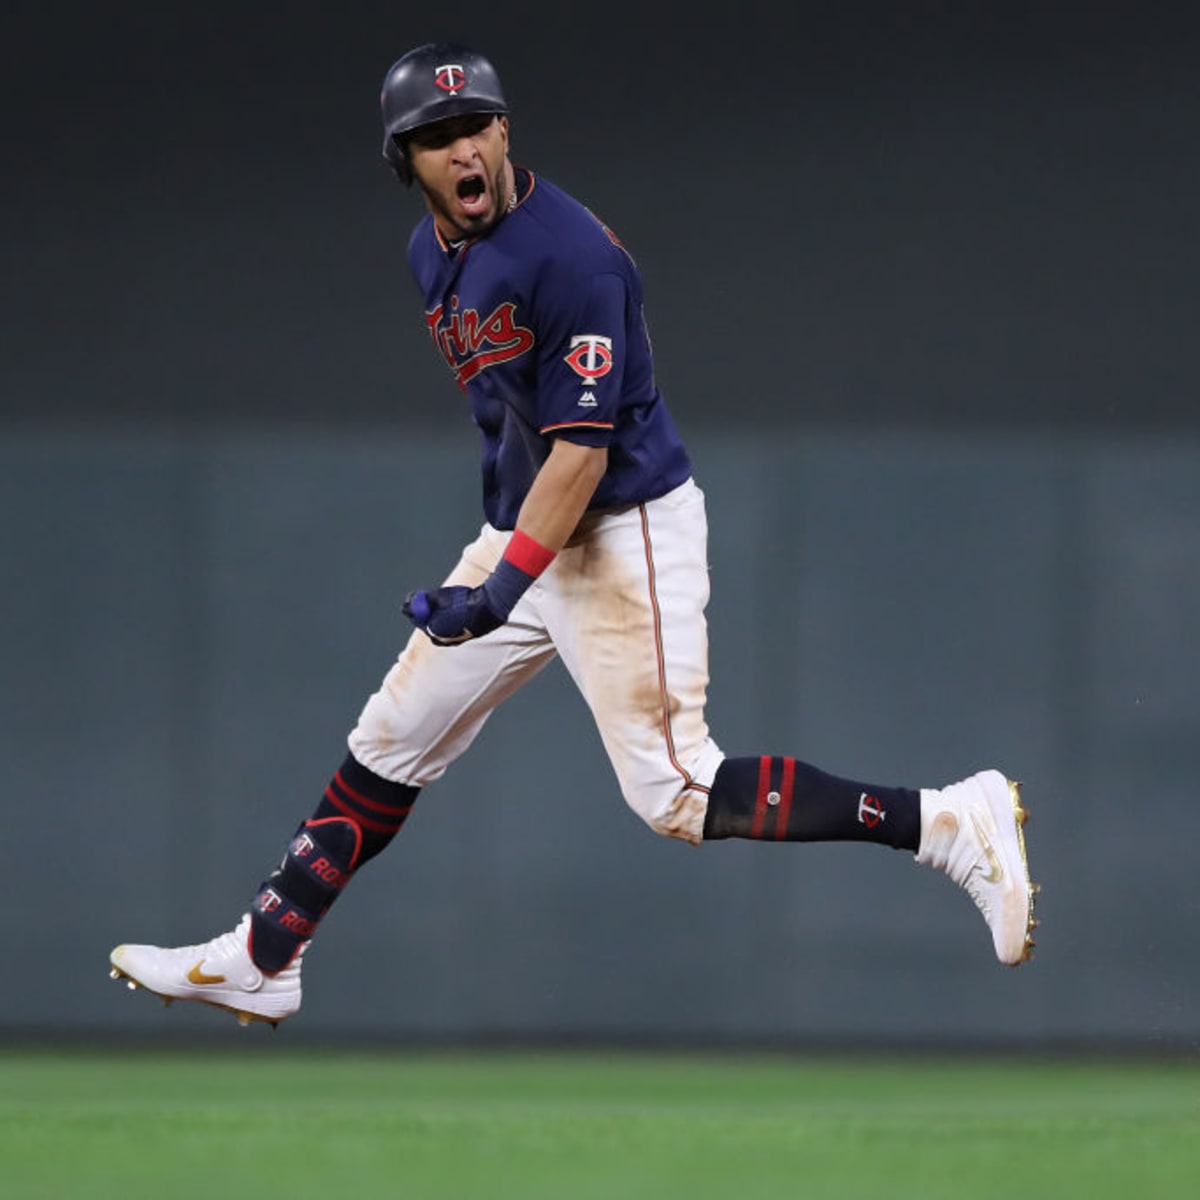 Cleveland Indians will rely on young arms, better outfield in 2021